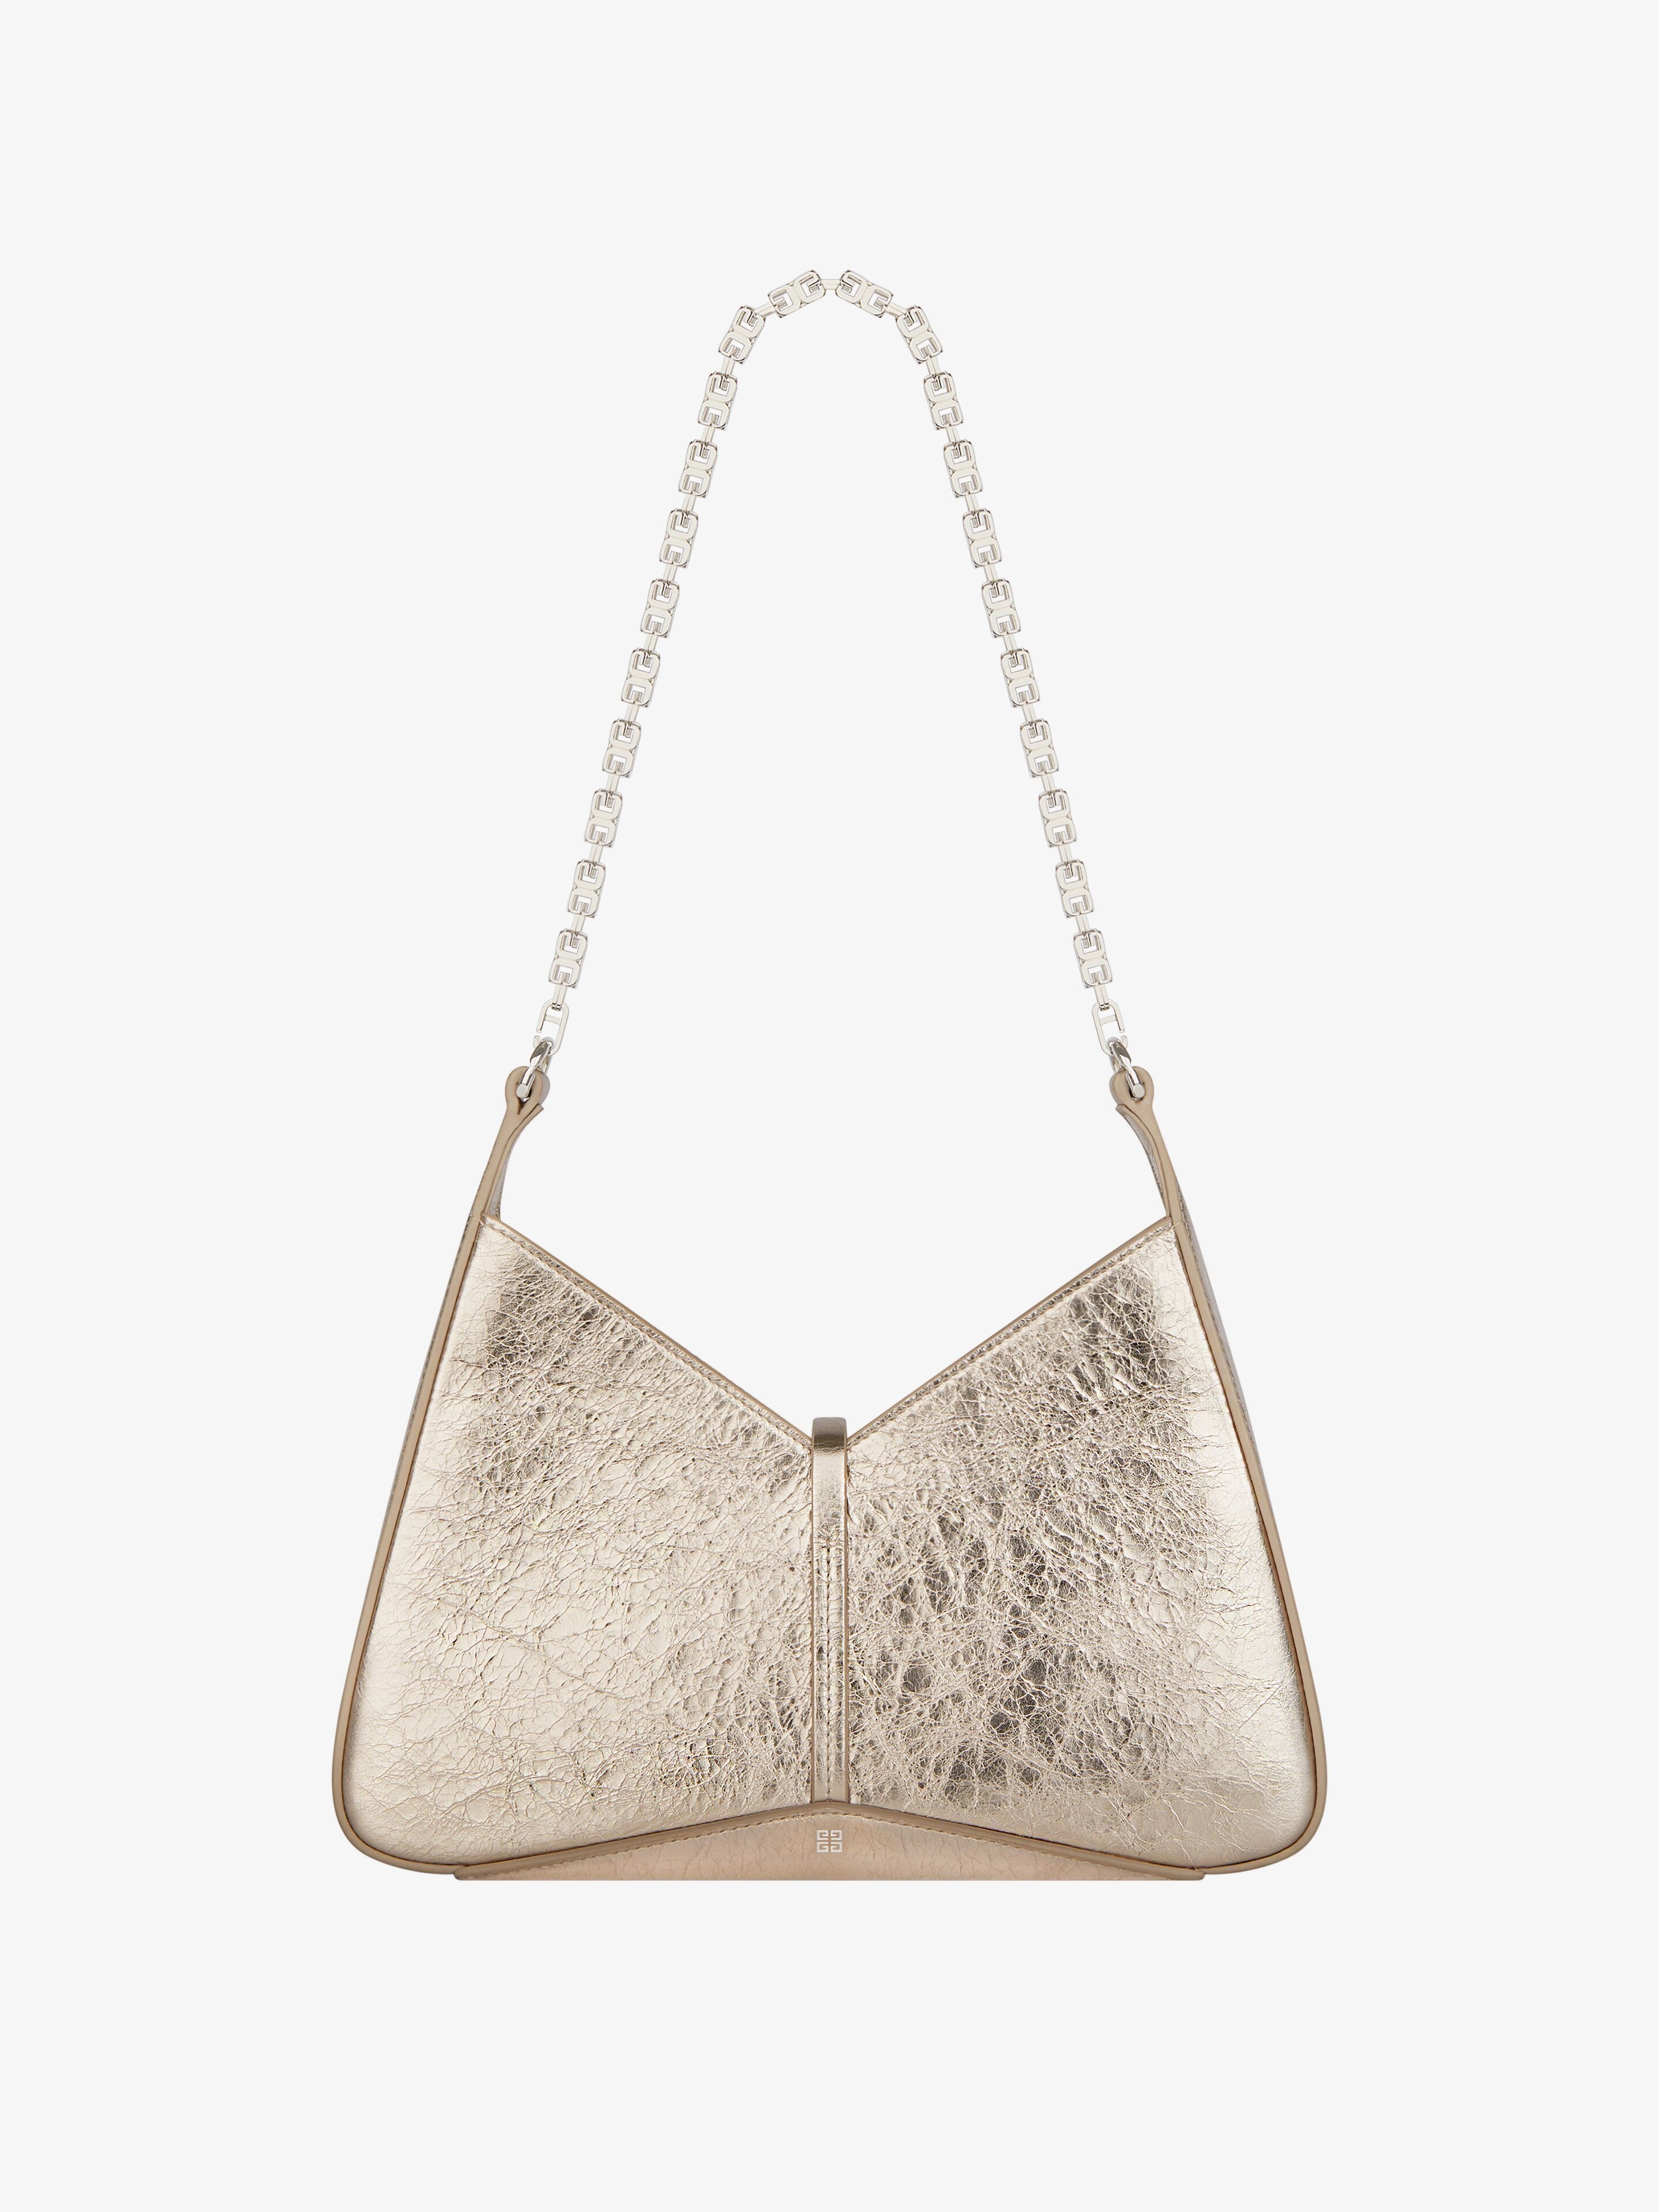 SMALL CUT OUT BAG IN LAMINATED LEATHER WITH CHAIN - 5